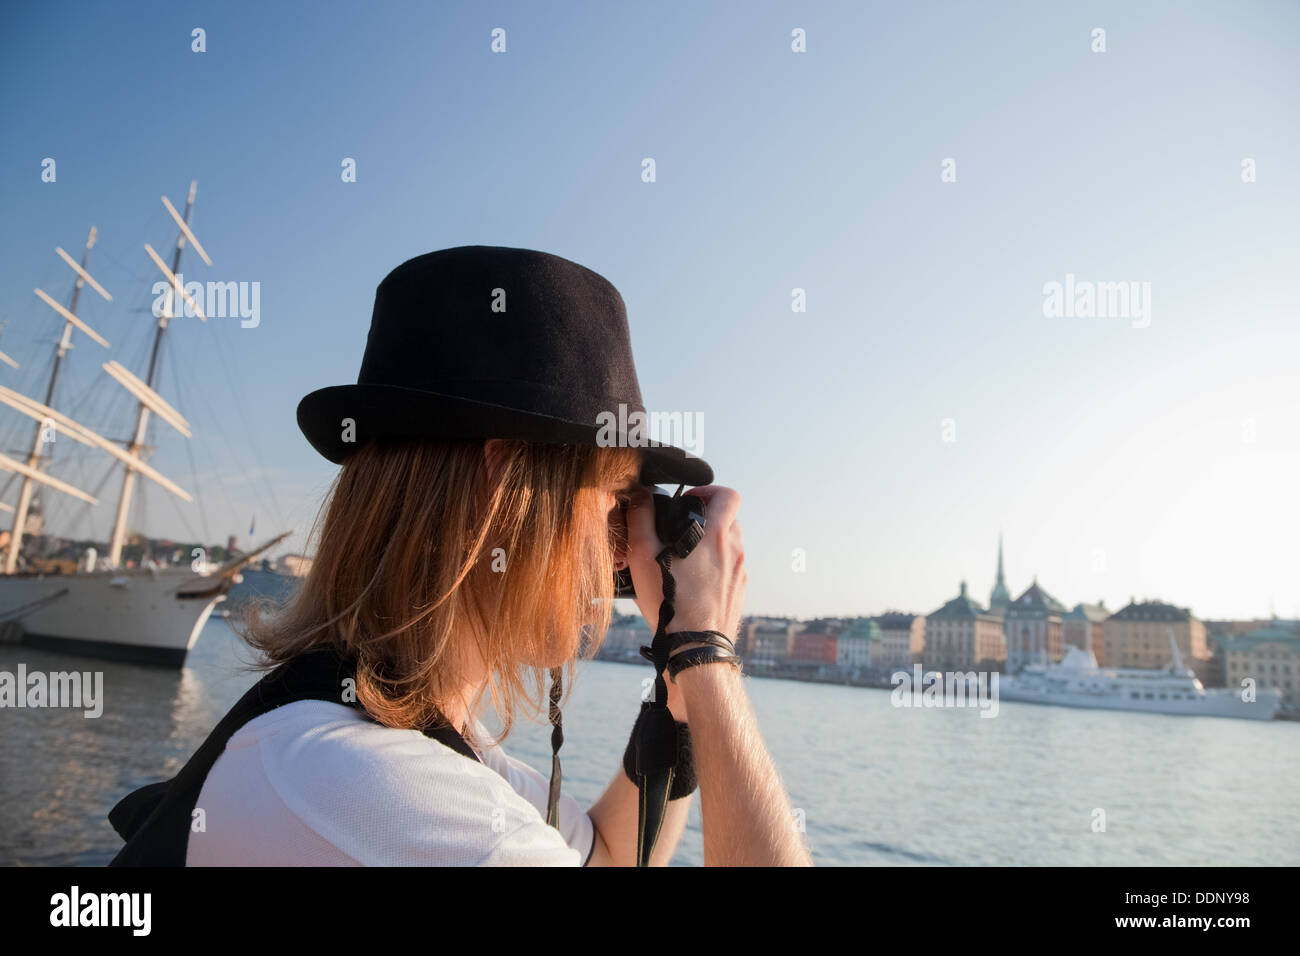 A photographer taking photographs of the waterfront in Stockholm, Sweden Stock Photo